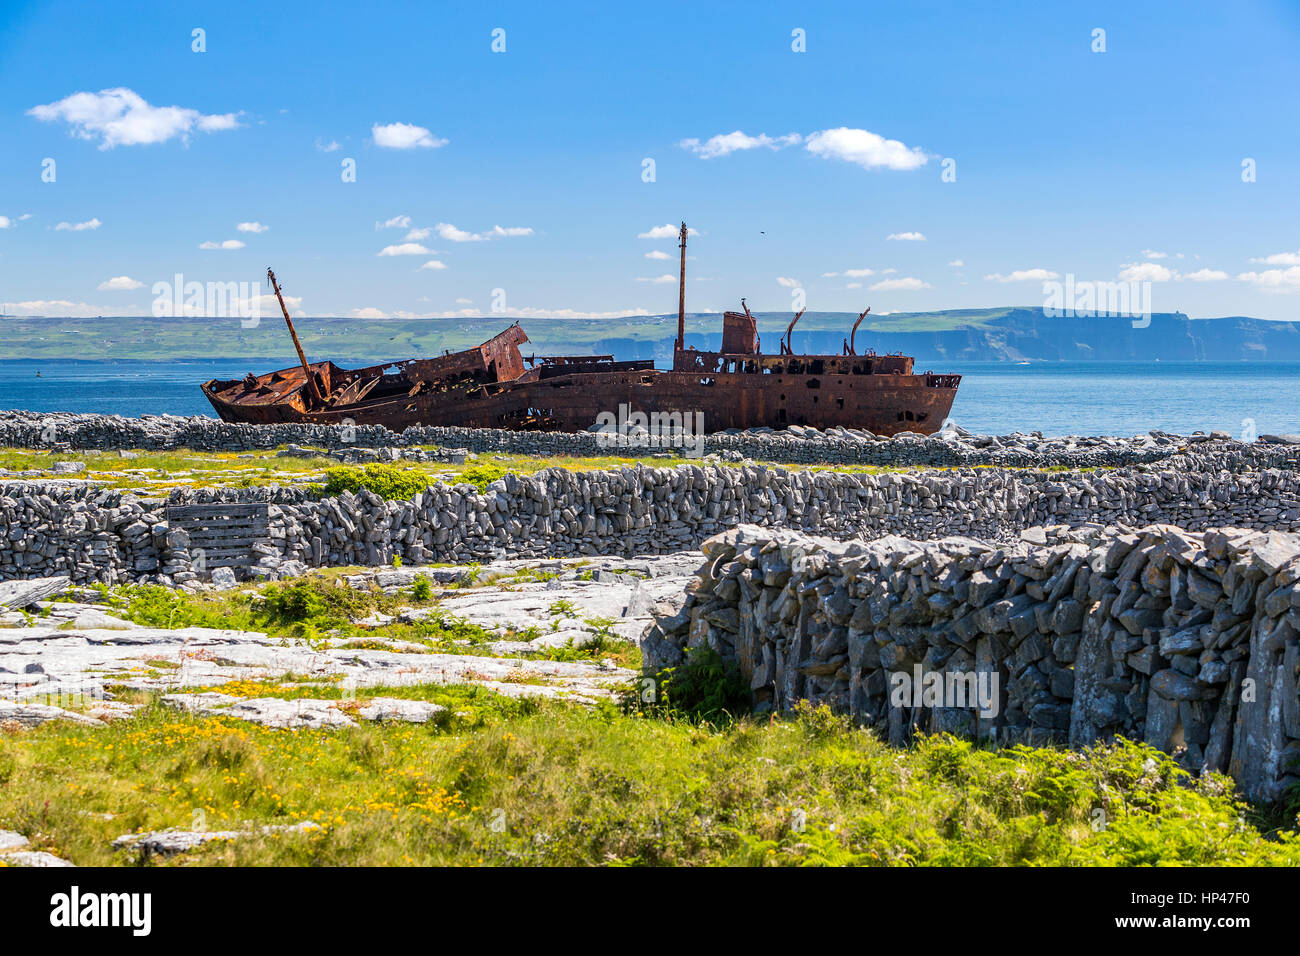 The wreck of the Plassey at Inis Oirr, County Galway, Ireland, Europe. Stock Photo